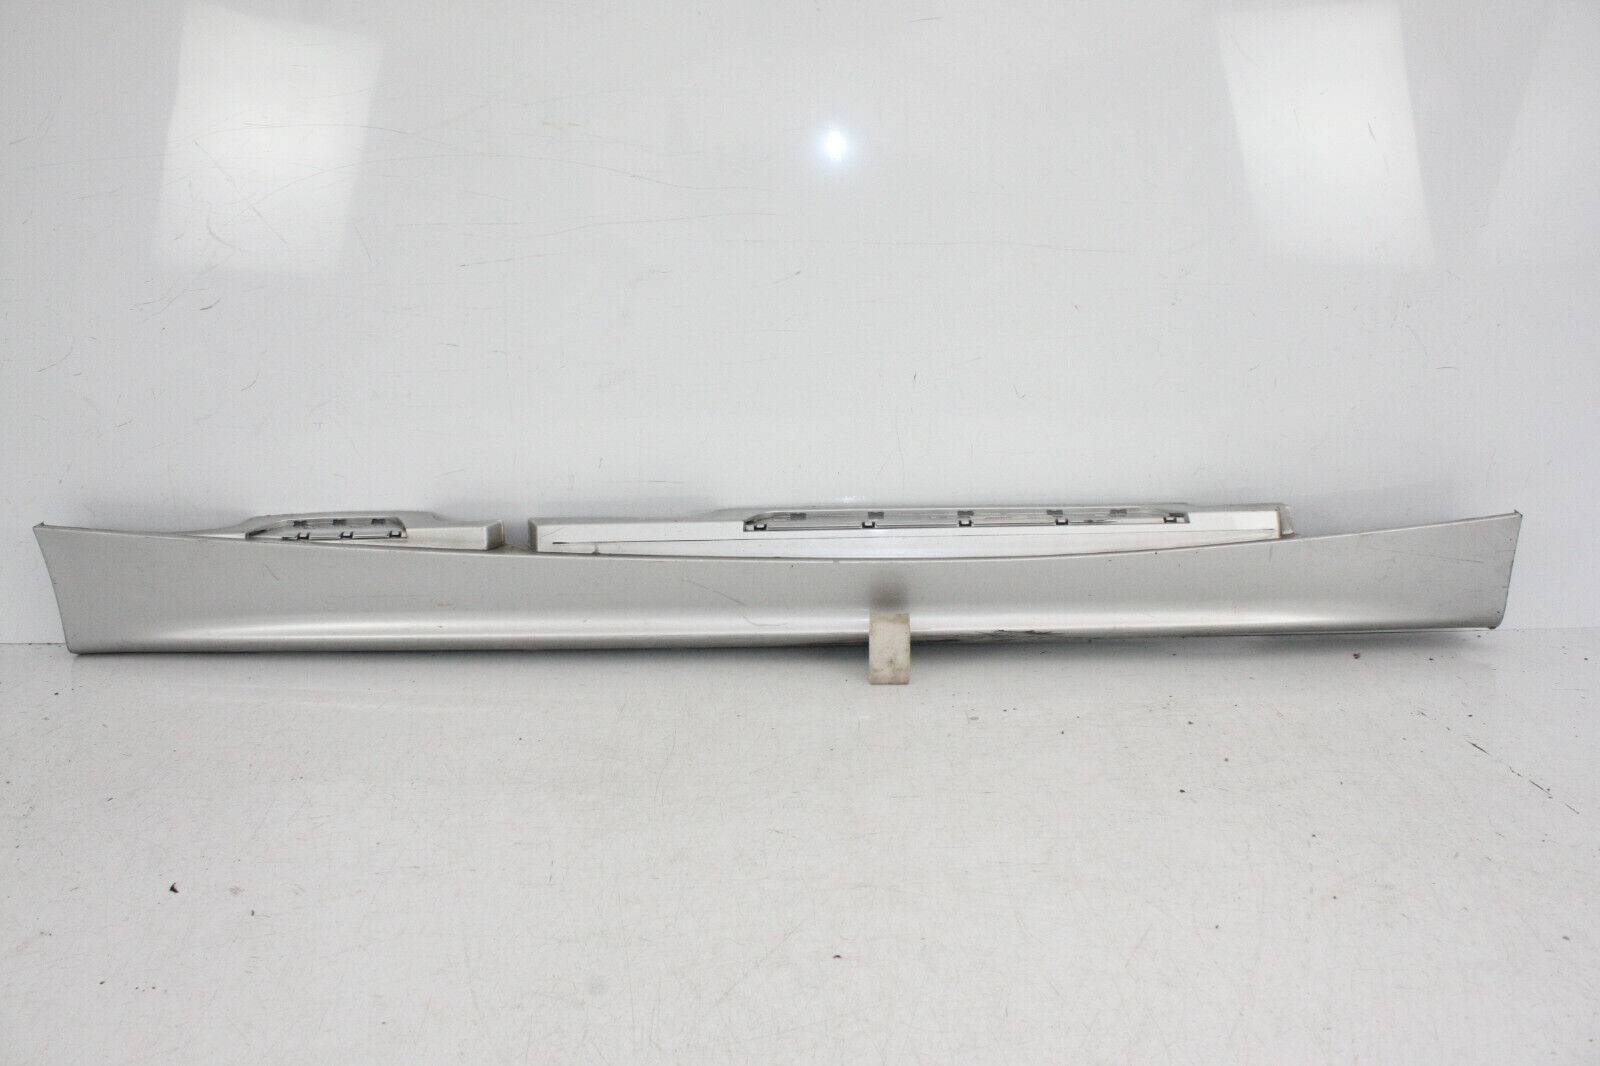 BMW 1 SERIES E87 RIGHT SIDE SKIRT 2004 TO 2007 175367544522